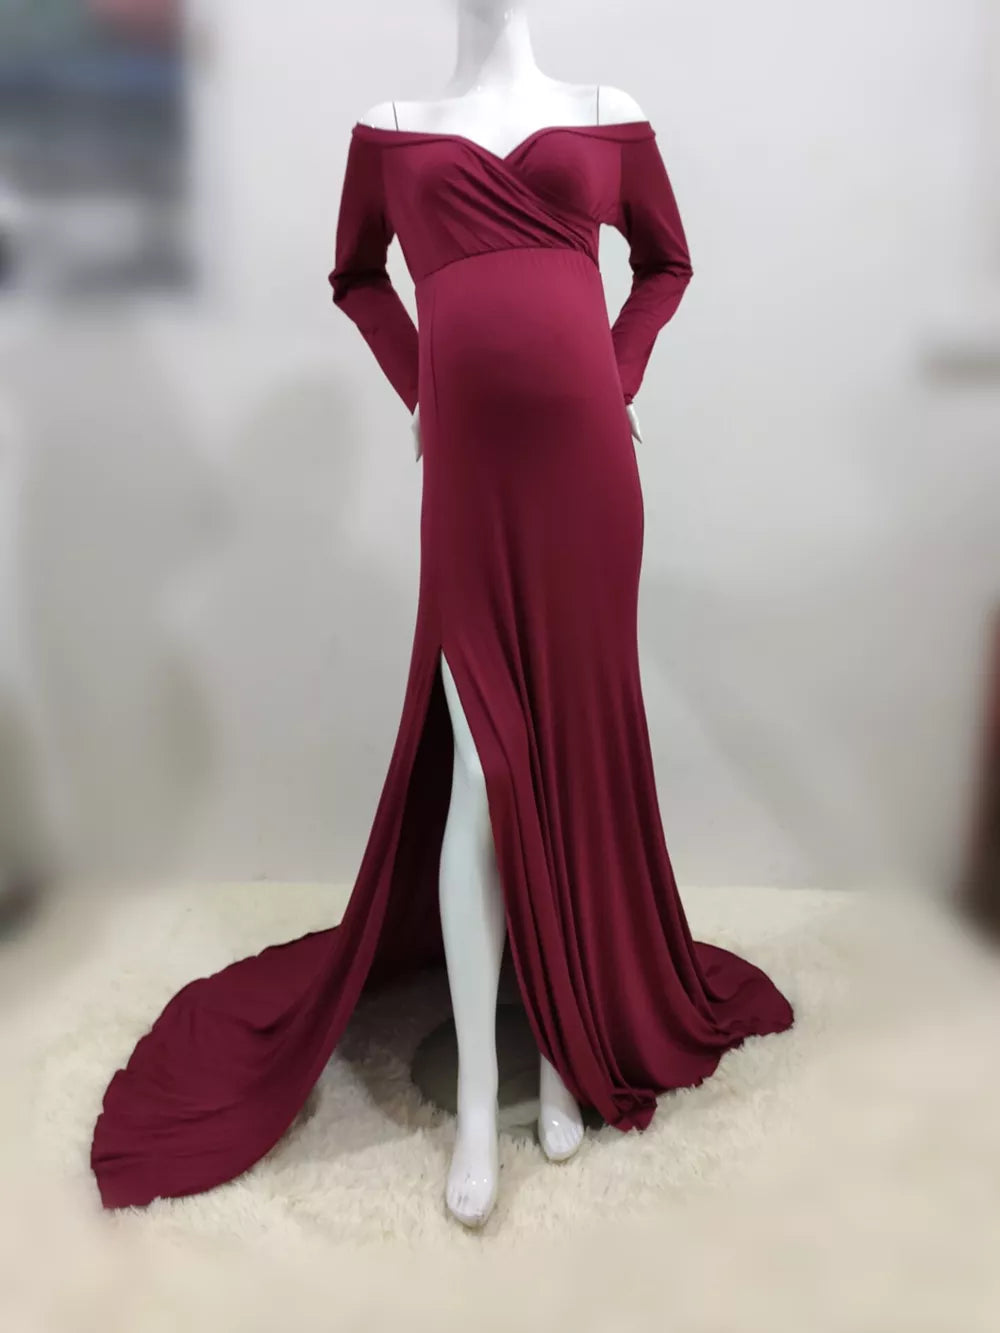 Maxi Gown Maternity Dresses For Photoshoot red by Baby Minaj Cruz